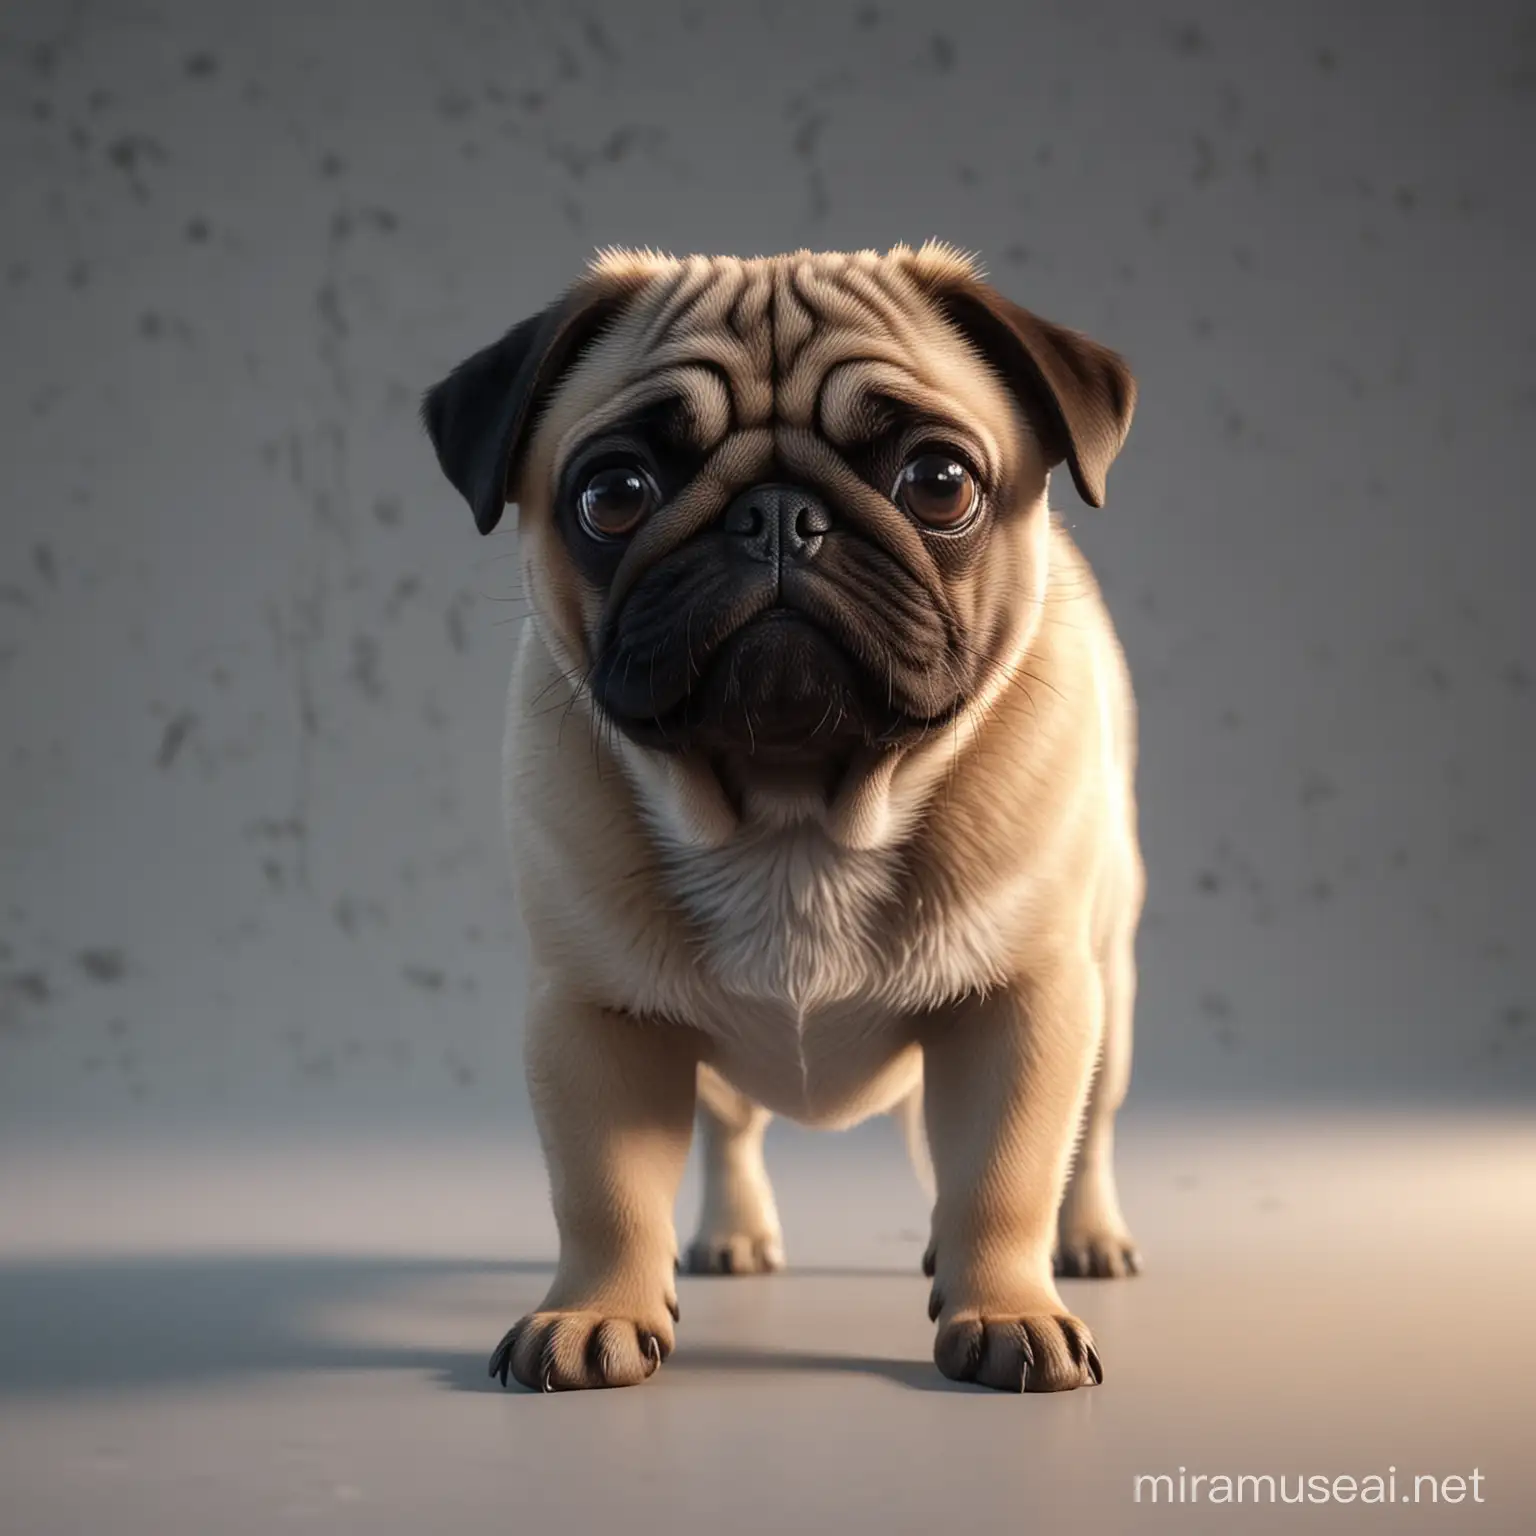 Adorable Pug in Whimsical Digital Art Style